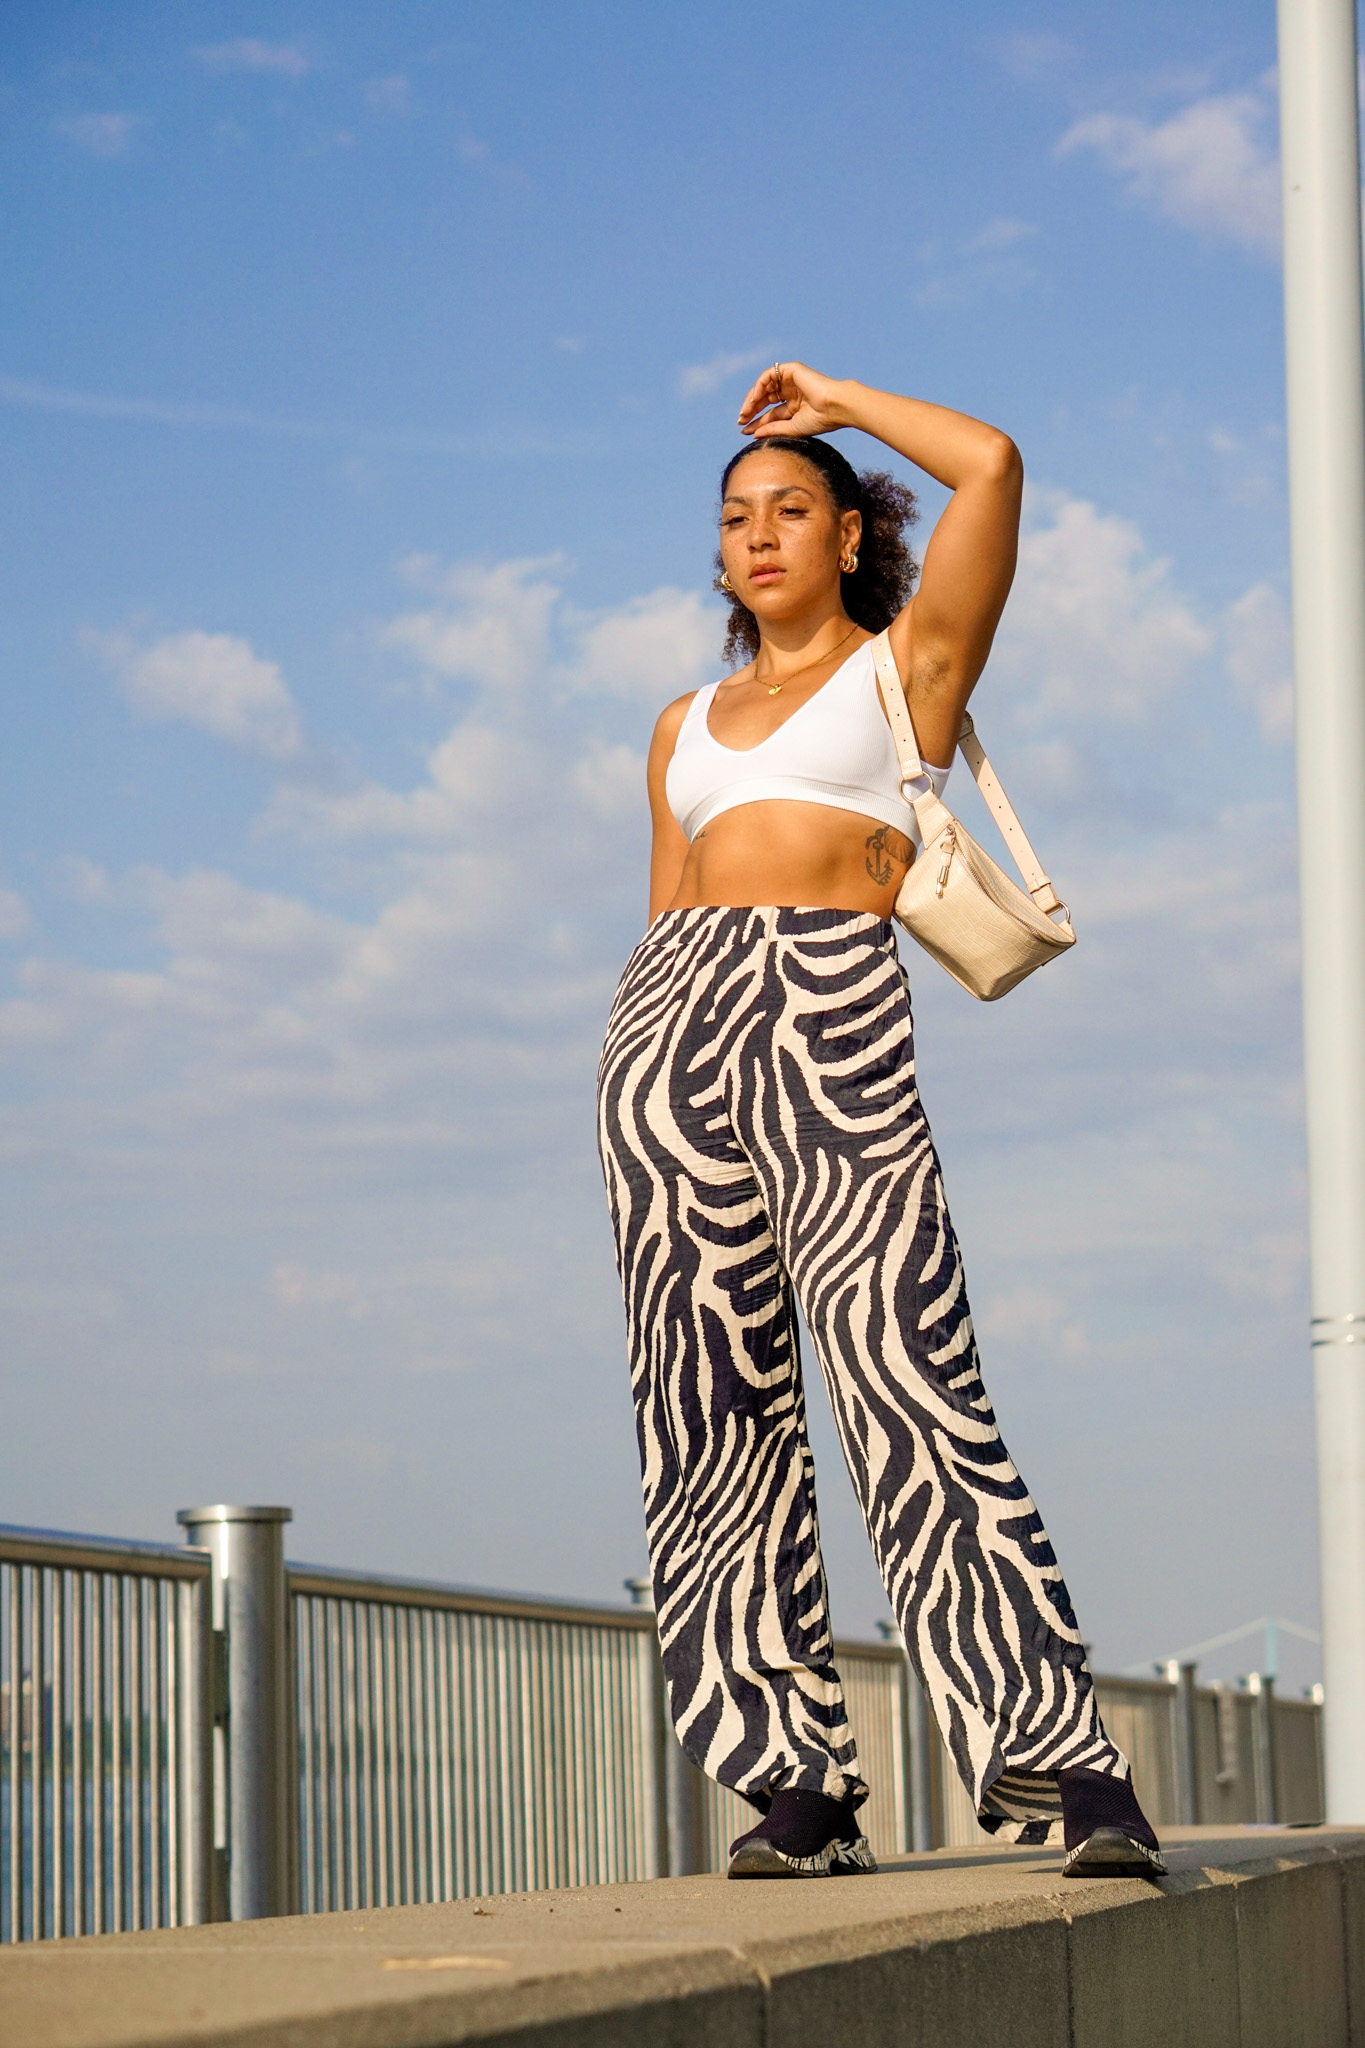 zebra print outfit ideas for pear shaped women, zebra print outfit ideas black girl, zebra print street style outfit, how to style zebra print